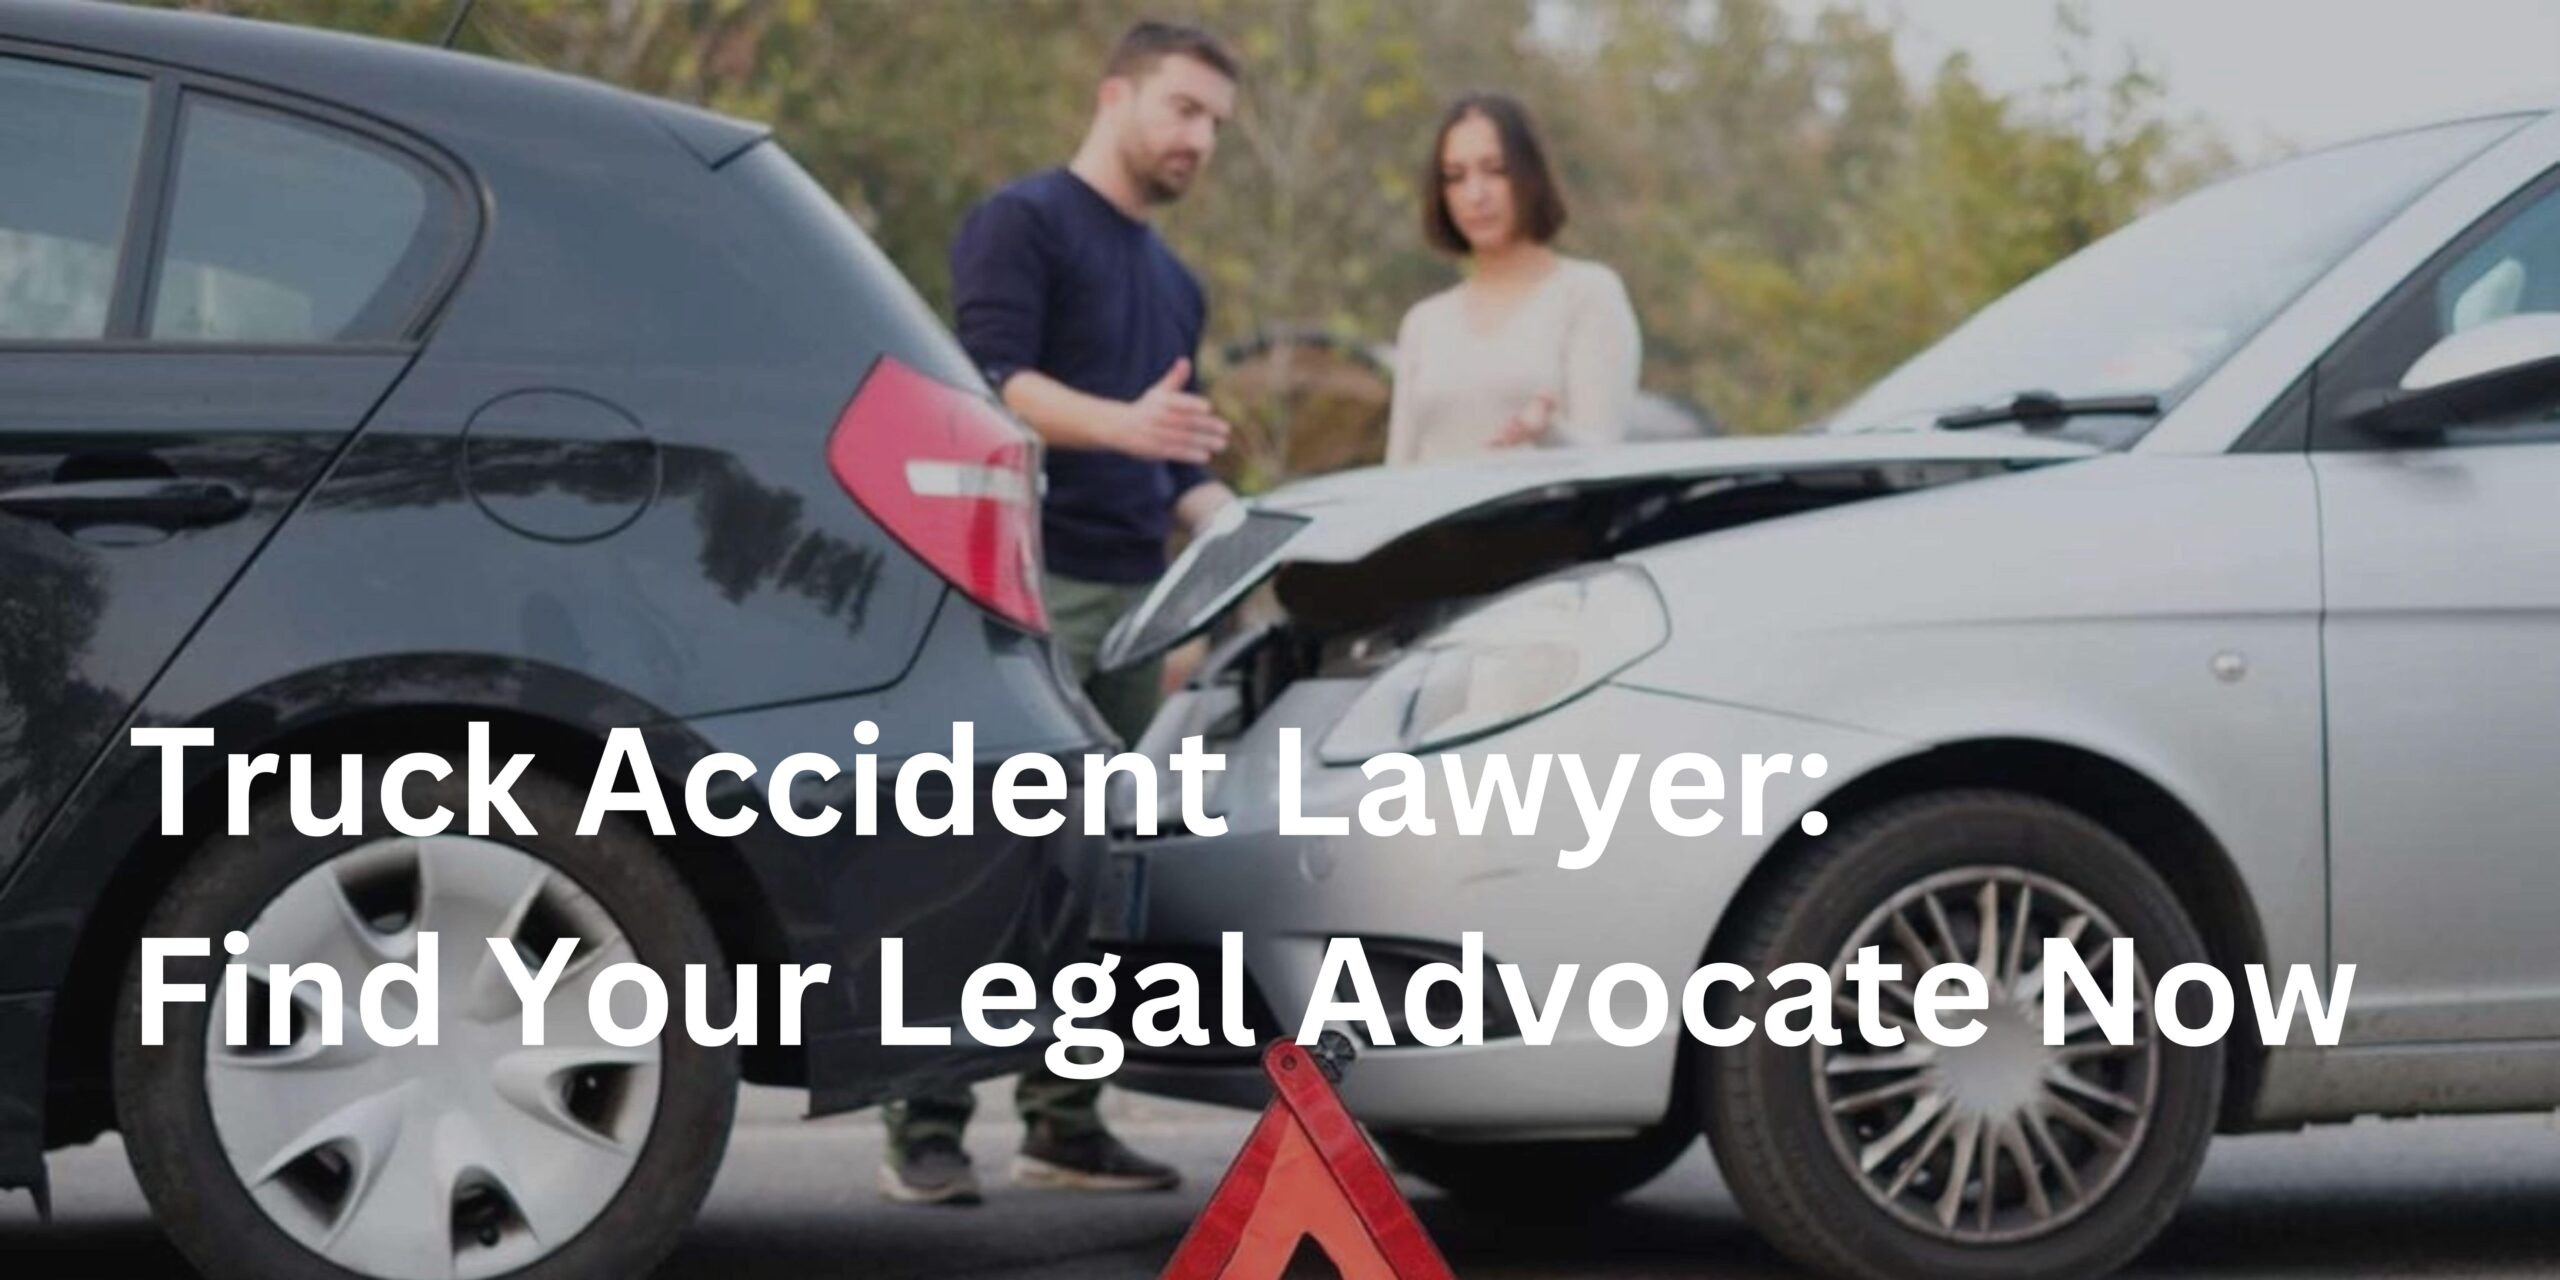 Truck Accident Lawyer: Find Your Legal Advocate Now